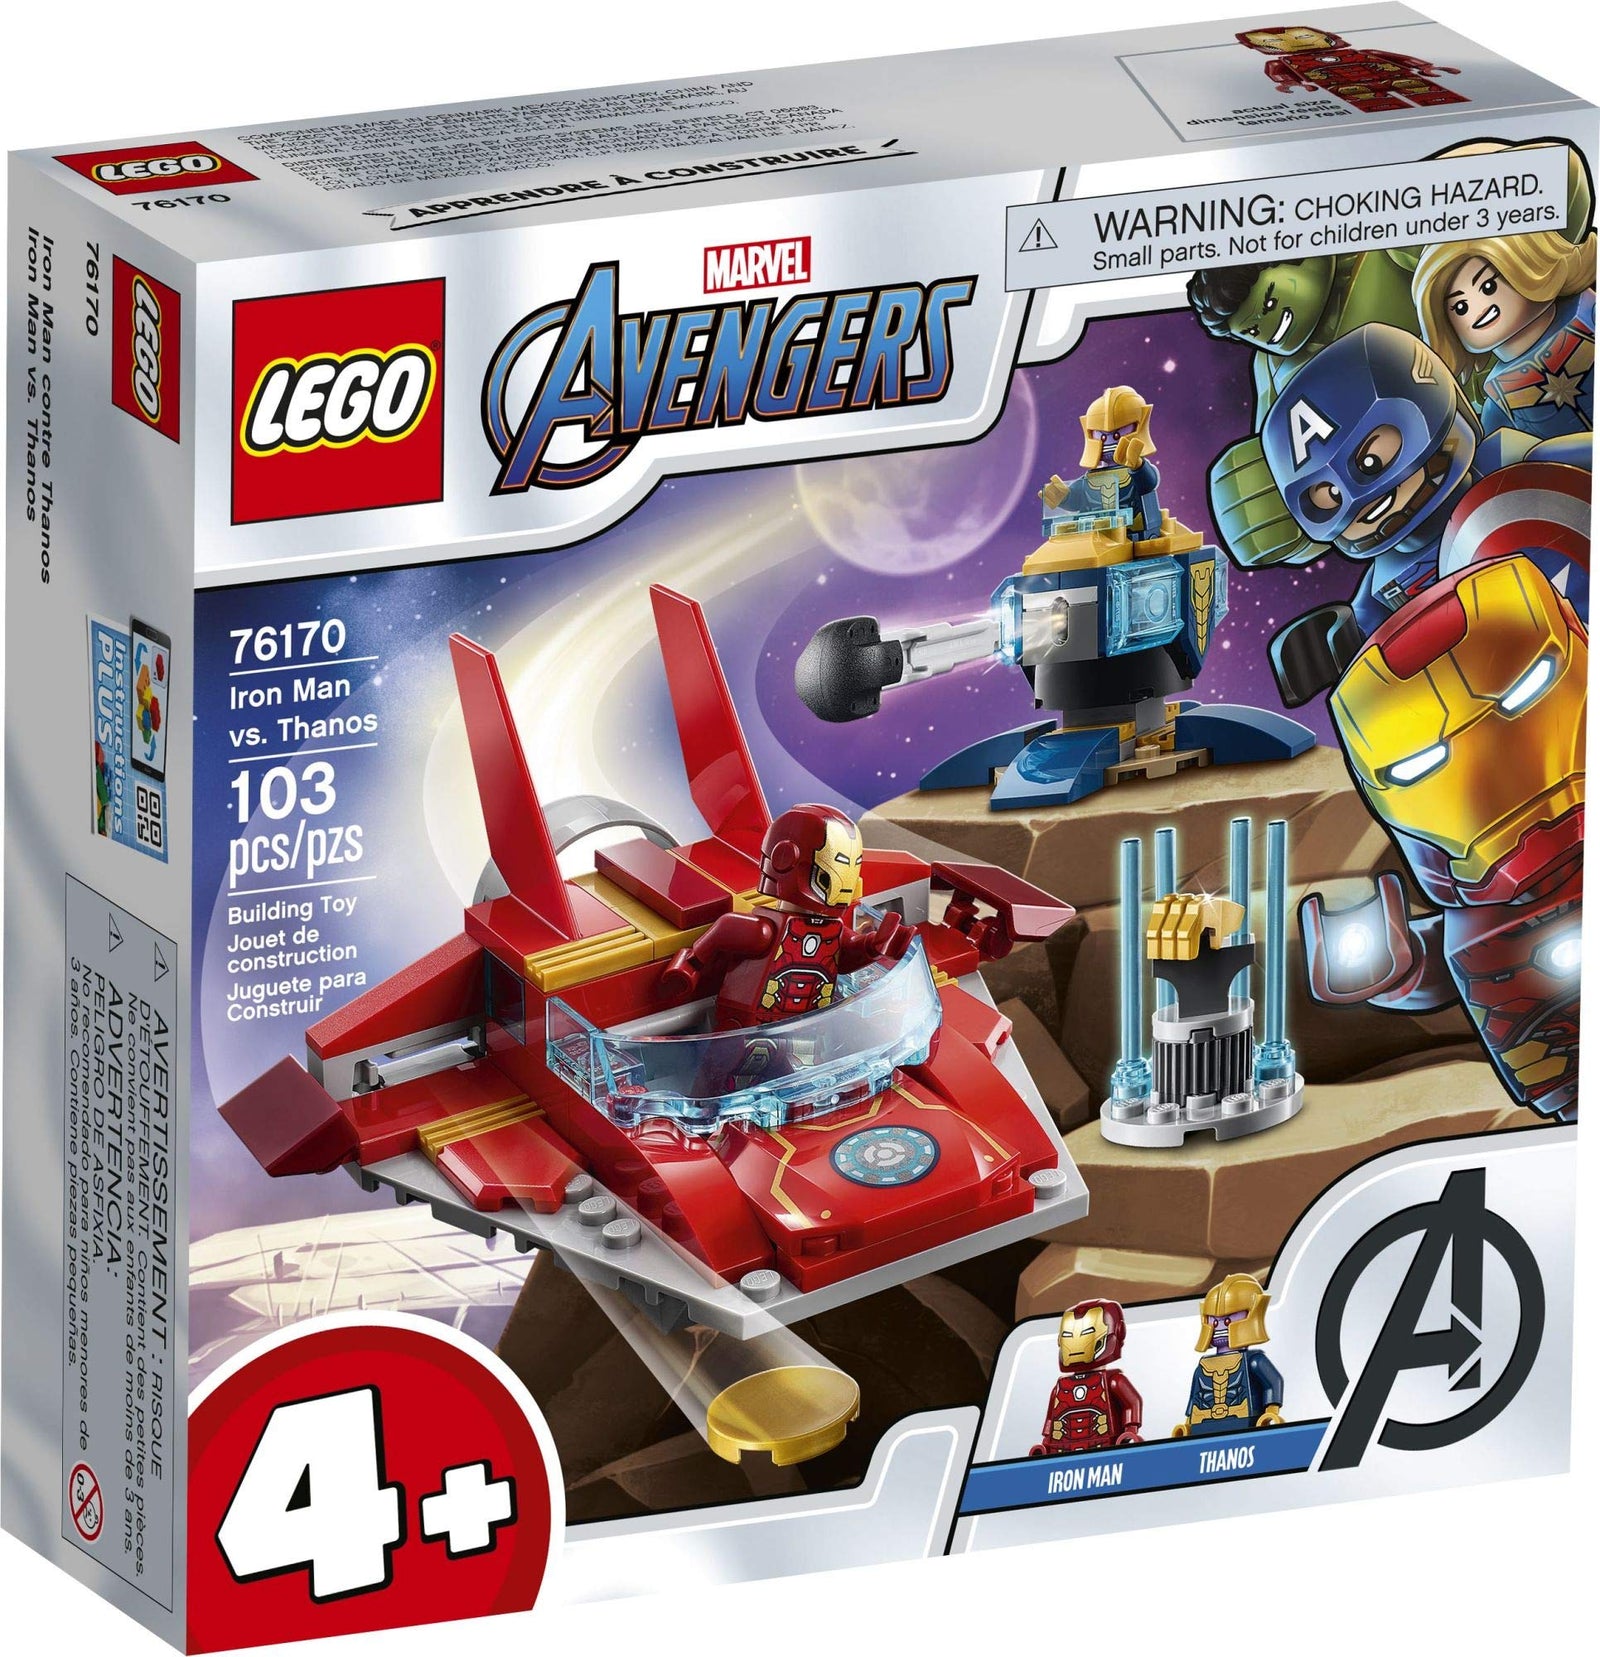 LEGO Marvel Avengers Iron Man vs. Thanos 76170 Cool, Collectible Superhero Building Toy for Kids Featuring Marvel Avengers Iron Man and Thanos Minifigures, New 2021 (103 Pieces)